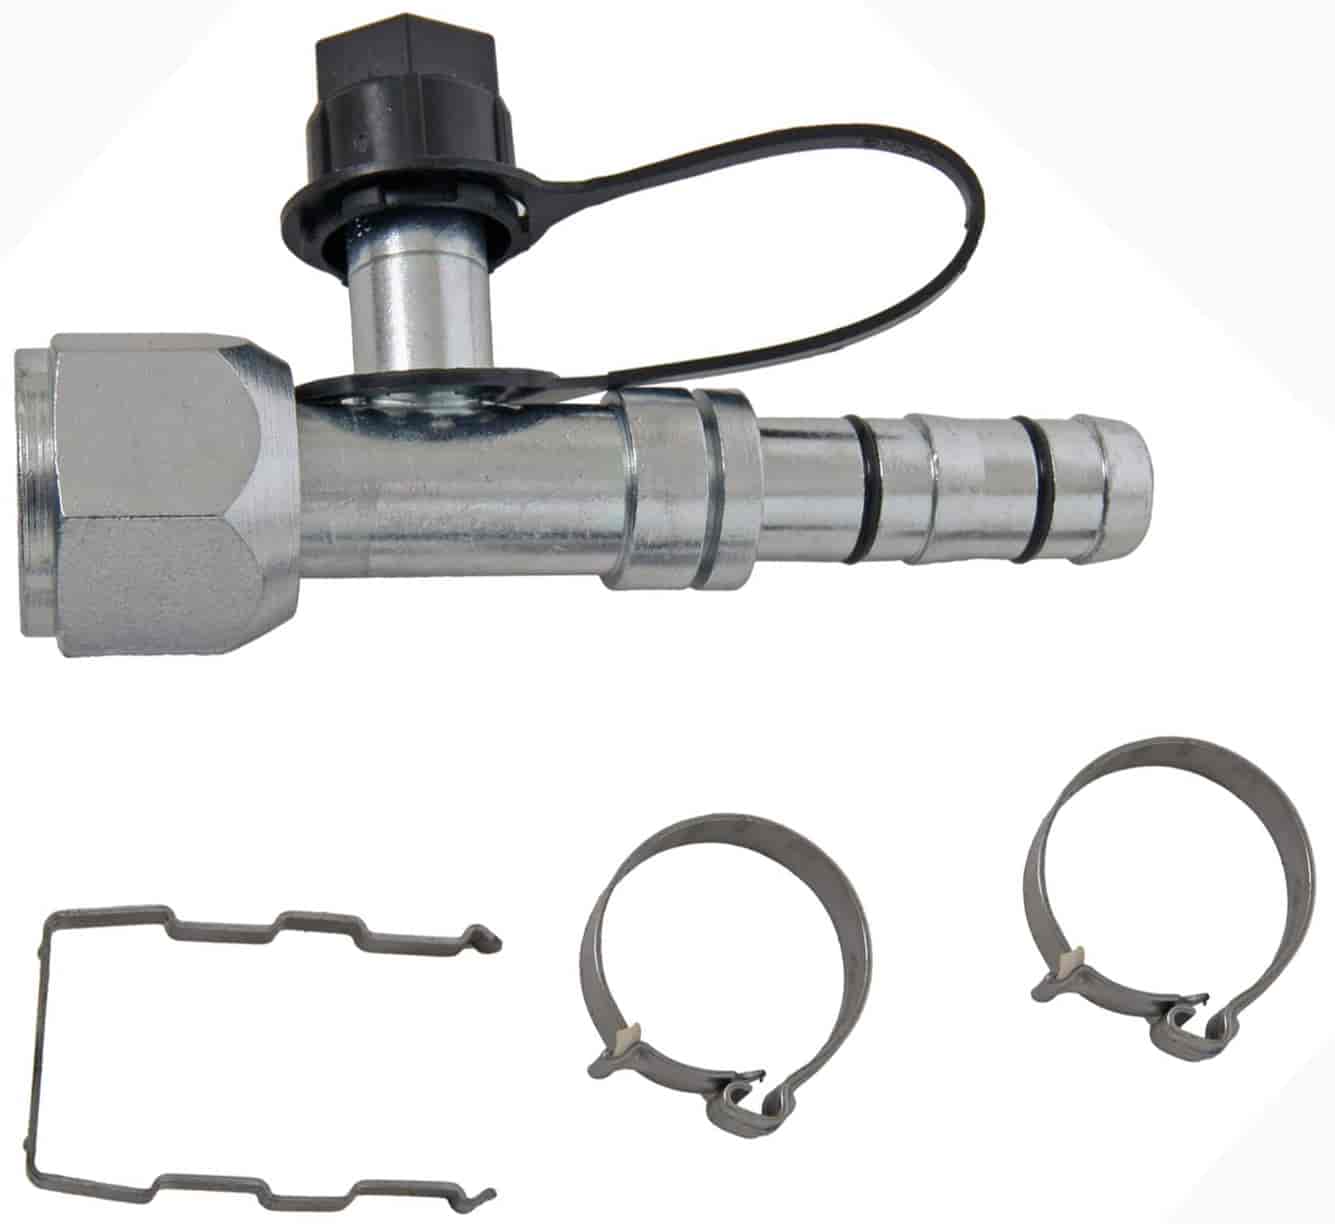 EZ Clip A/C Fitting Kit Hose Size: -10 (1/2 in.) - Straight, with Low-Side Charge Port (R134A)